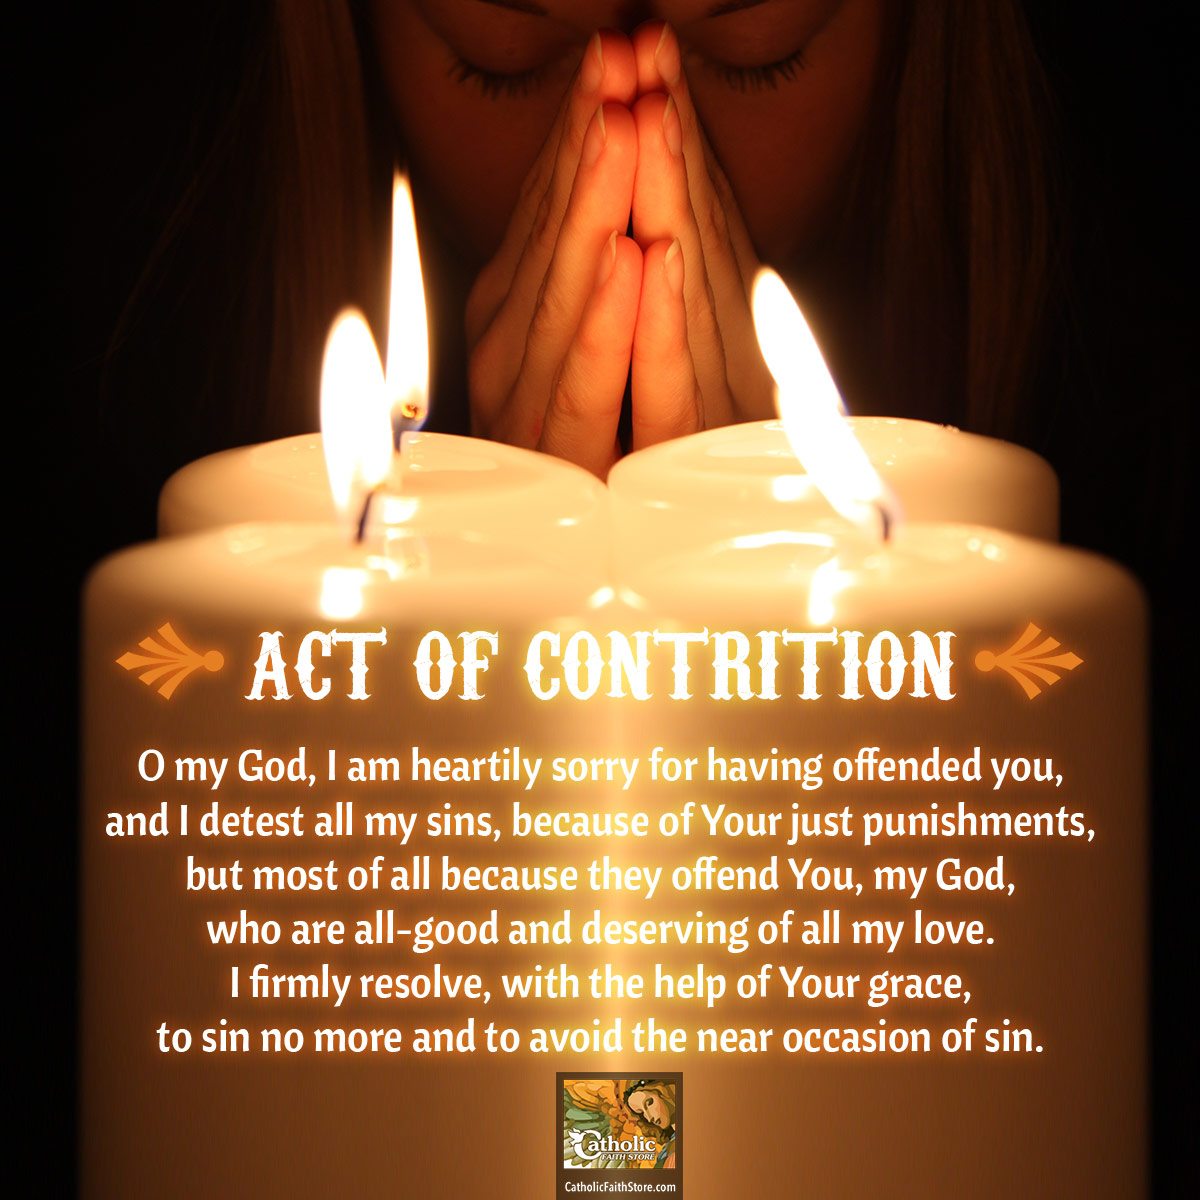 When do you take the Catholic Act of Contrition?